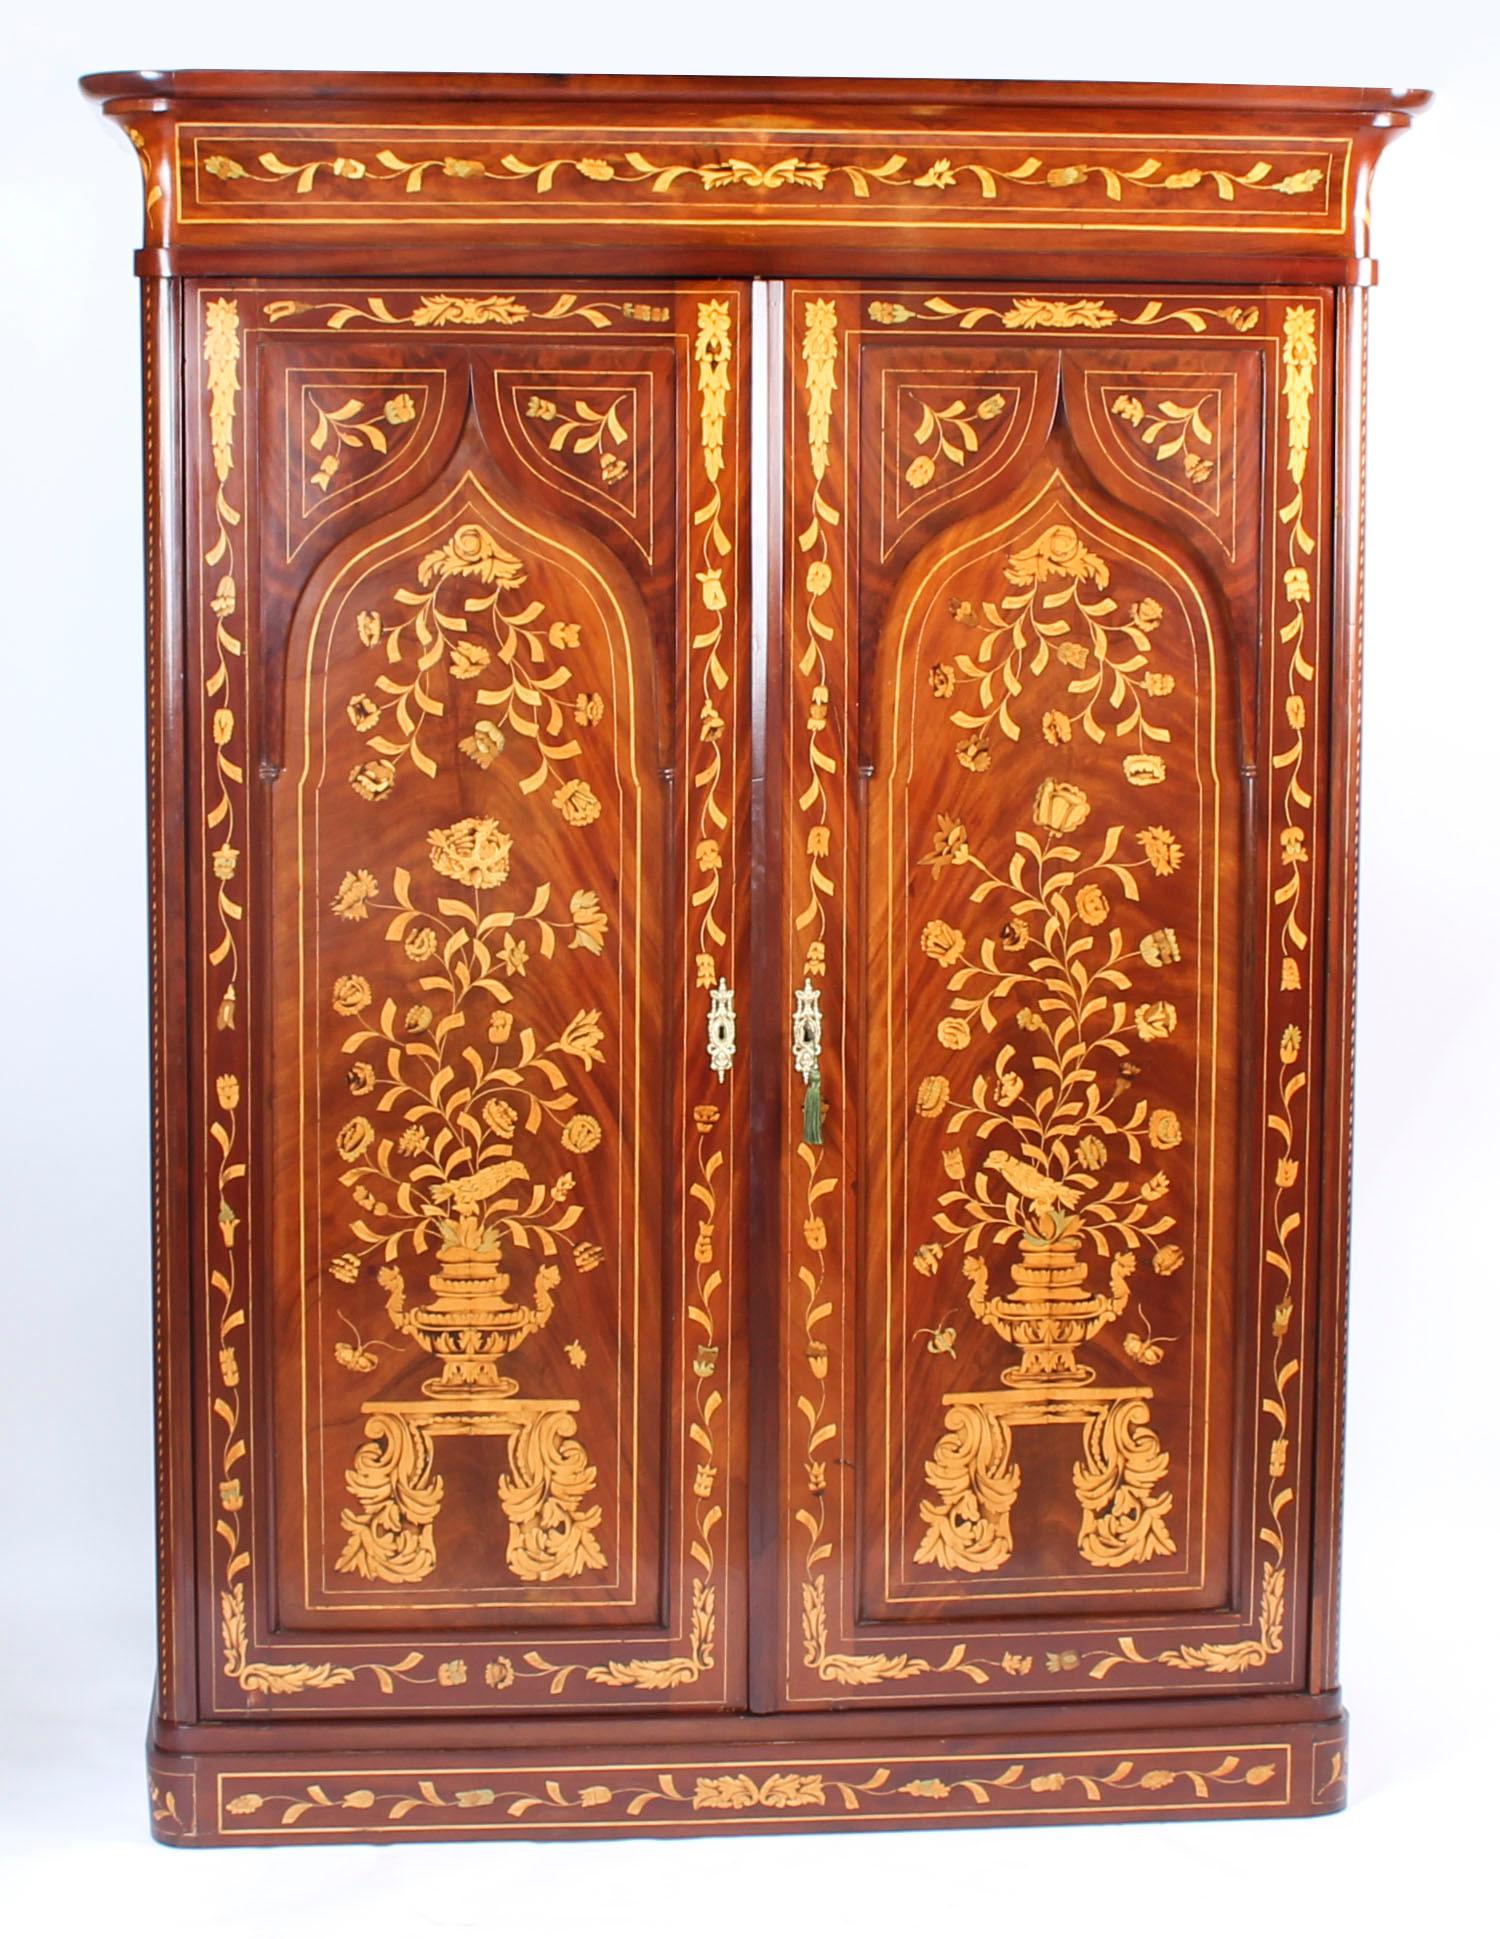 A 19th century Dutch mahogany and marquetry wardrobe, moulded concave cornice above a pair of panelled doors enclosing drawers, profusely inlaid with flowering stems, insects and scrolling leaves, circa 1840. Mesures:188 cm high, 127 cm wide.
 
This